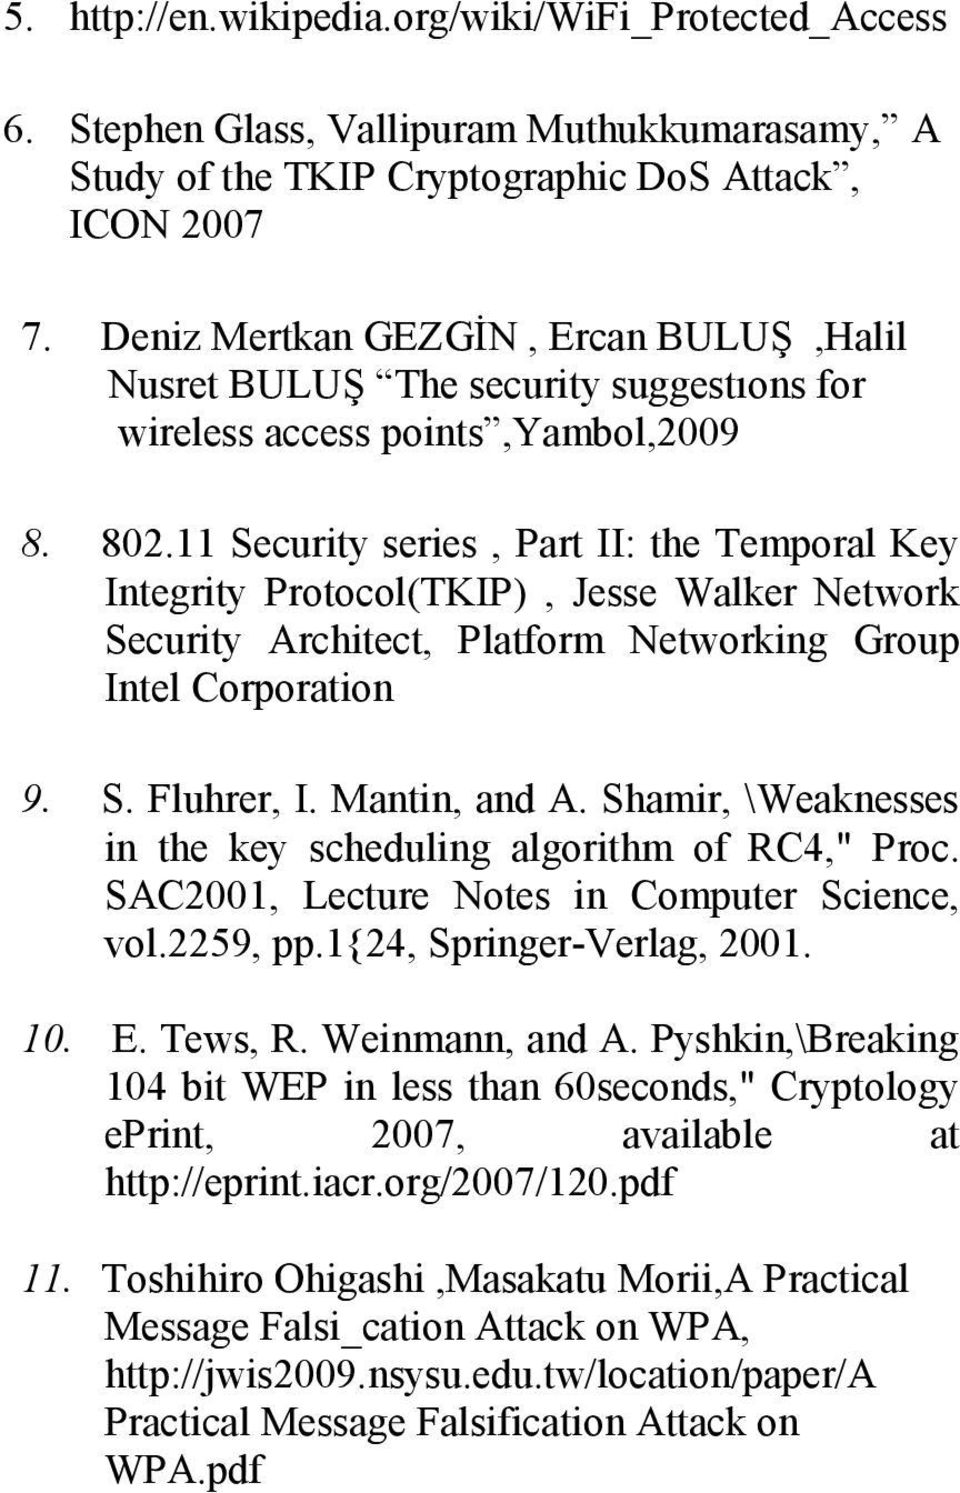 11 Security series, Part II: the Temporal Key Integrity Protocol(TKIP), Jesse Walker Network Security Architect, Platform Networking Group Intel Corporation 9. S. Fluhrer, I. Mantin, and A.